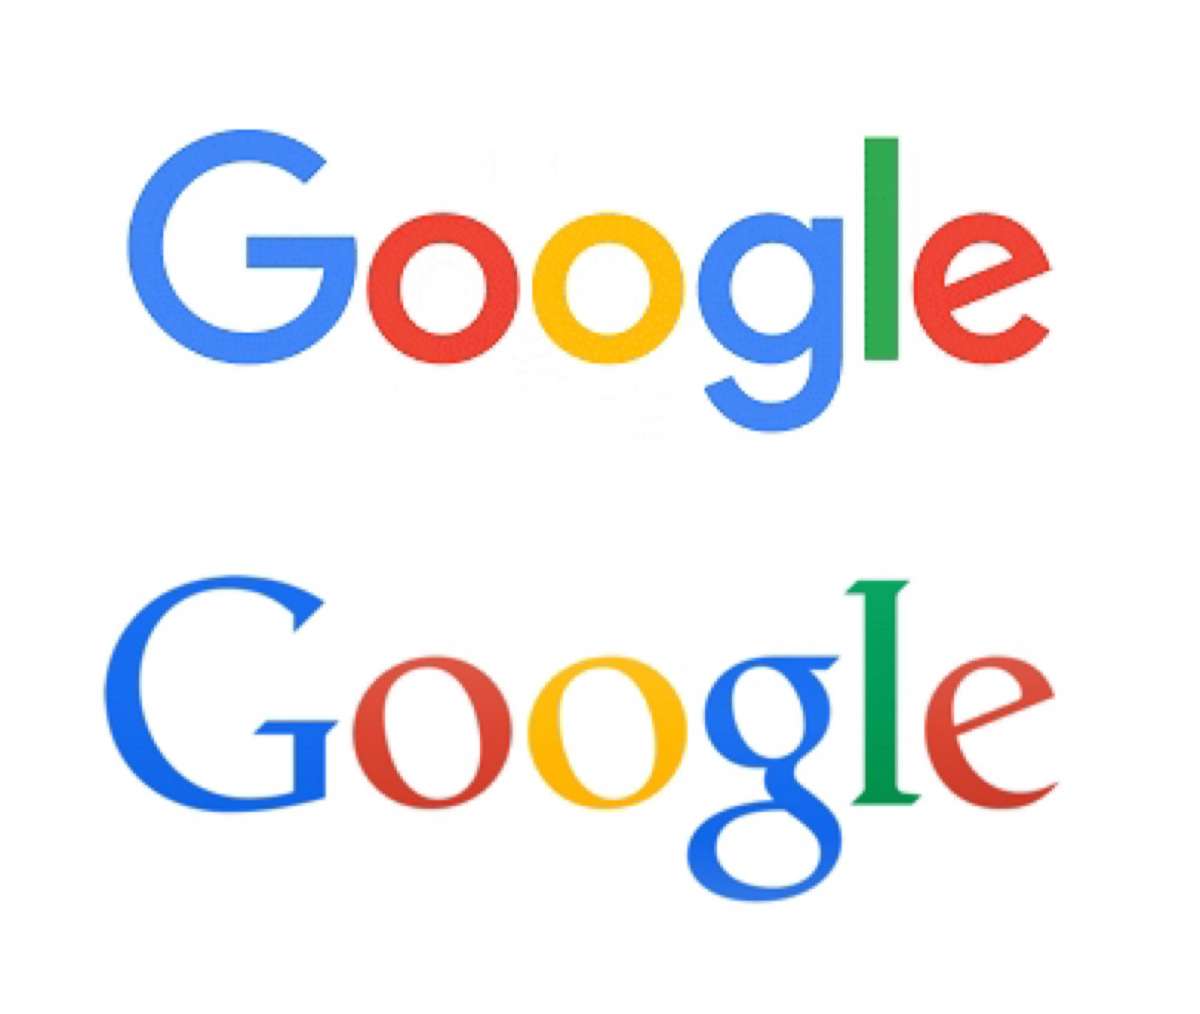 Previous Google Logo - Google's new logo's cleaner, rounder and, according to